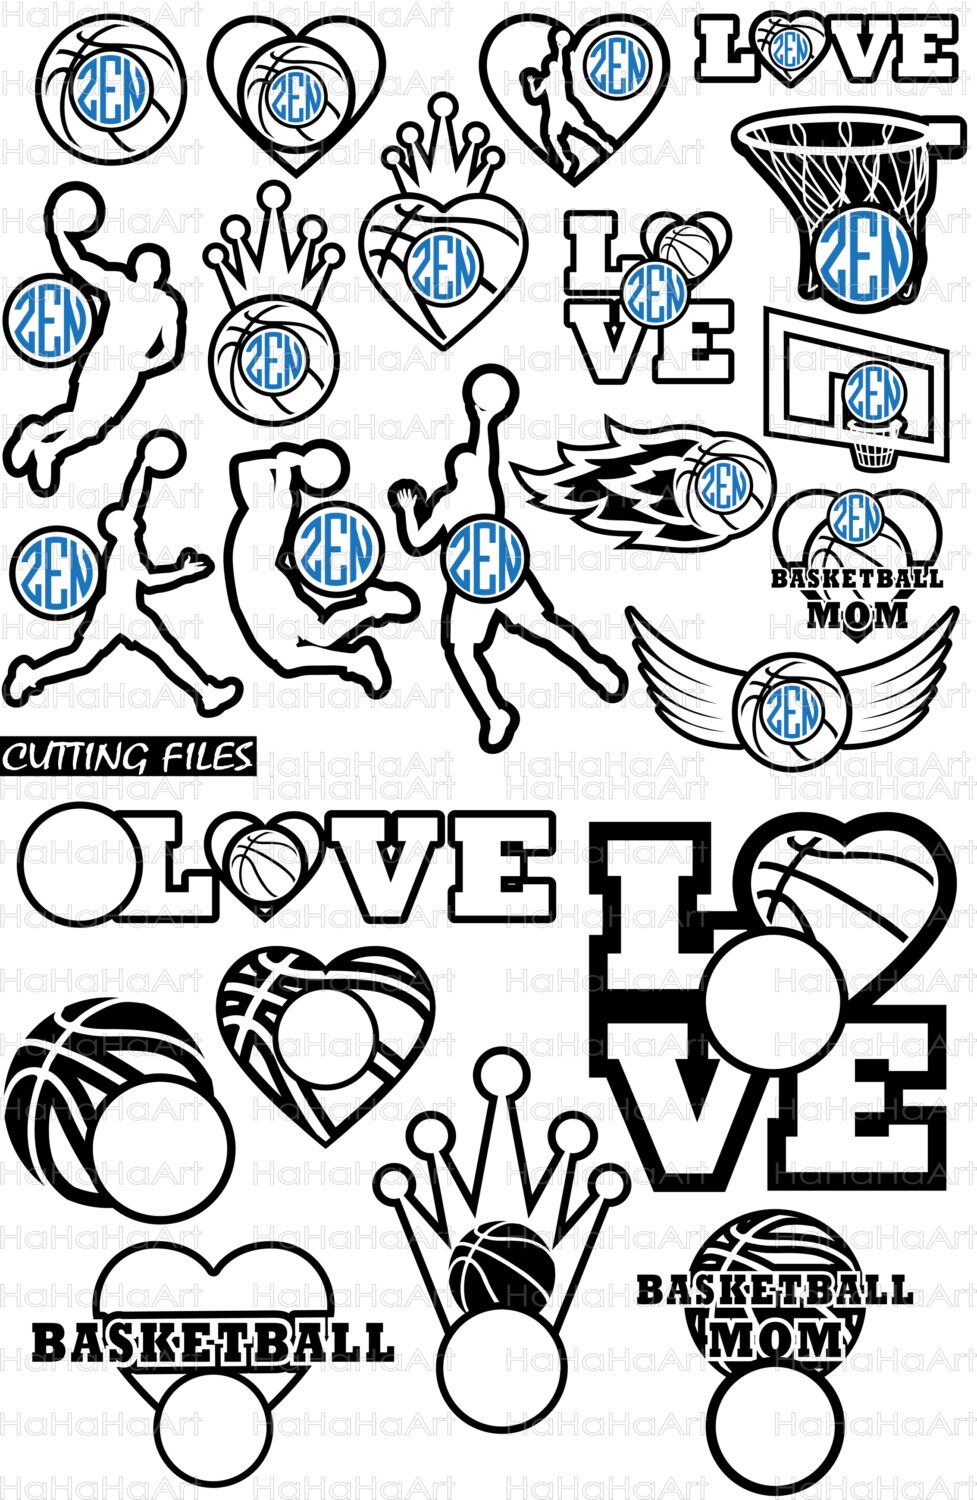 Basketball Monogram Circle Outline Cutting Files Svg by HaHaHaArt